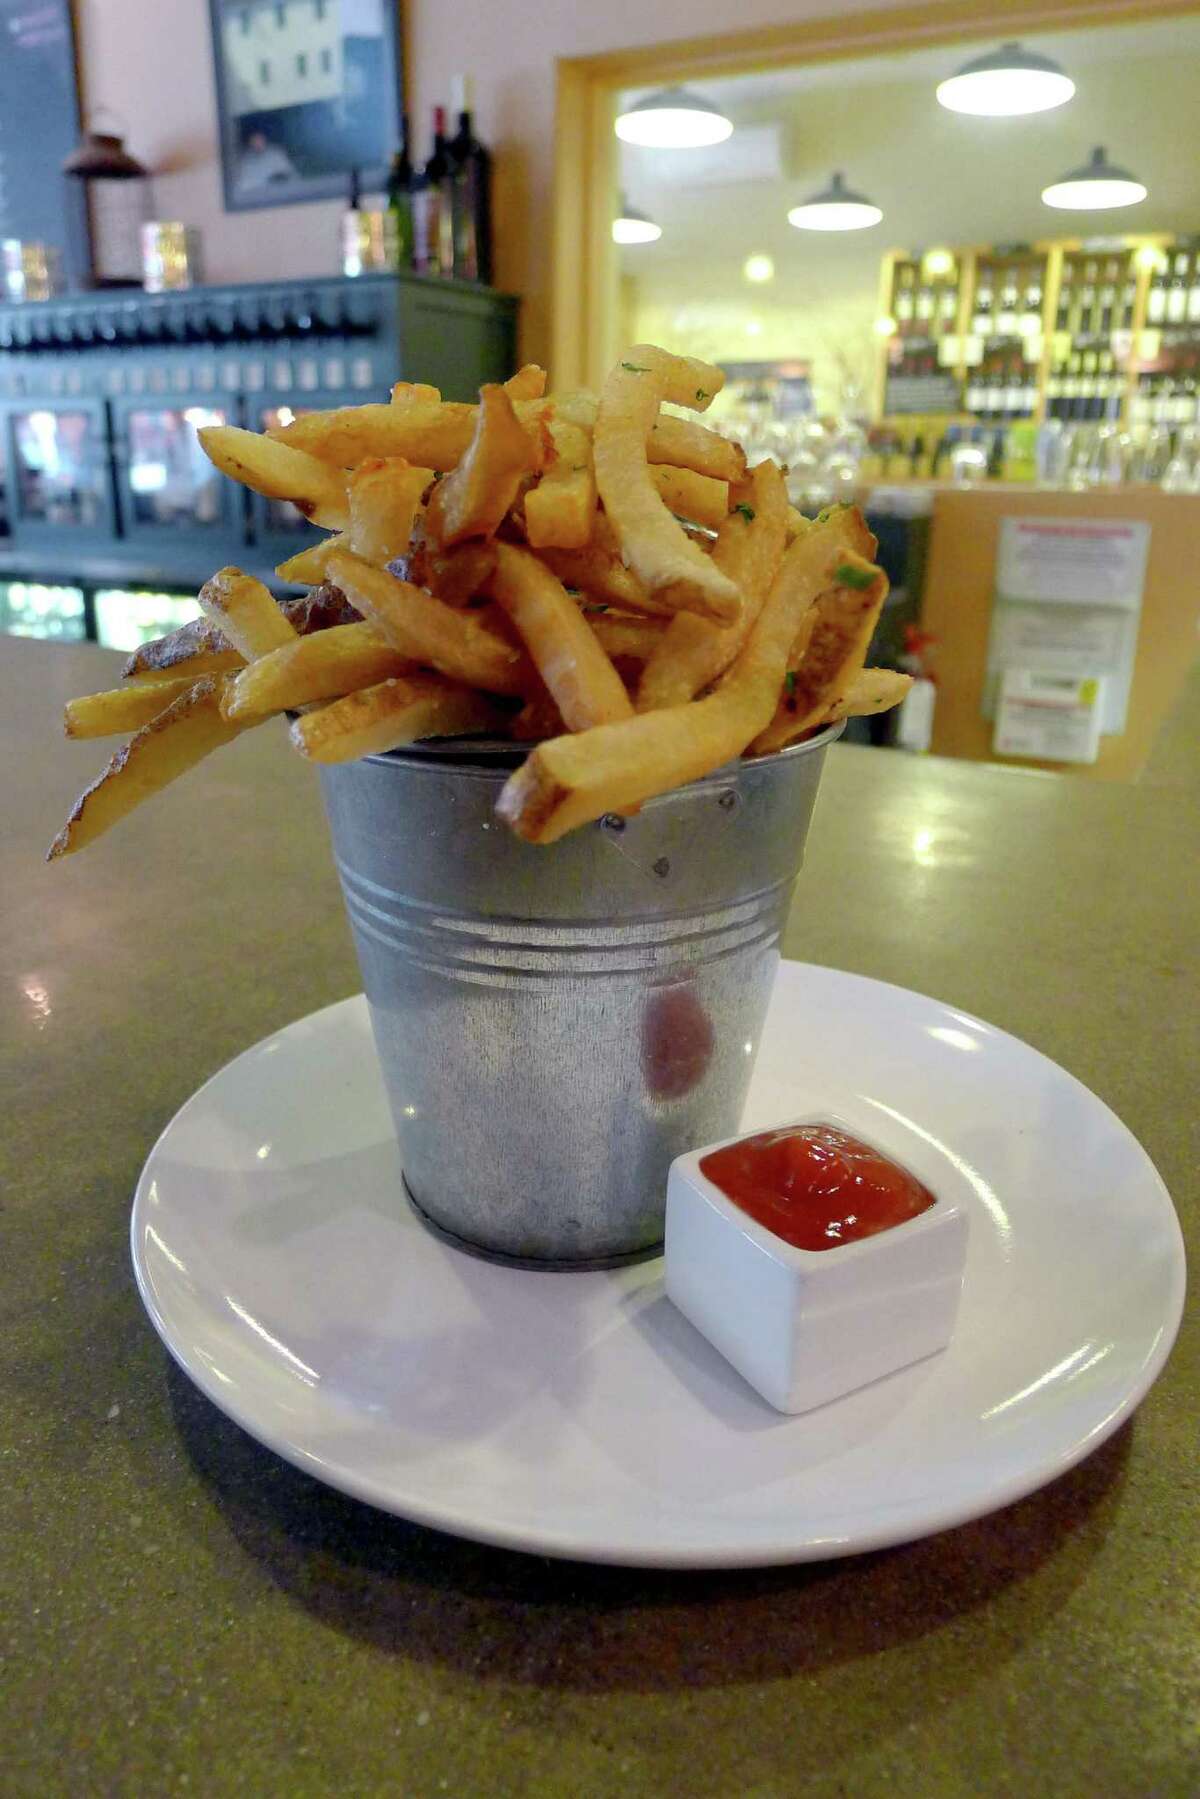 Hand cut Frites at barVino in North Creek N.Y. Tuesday May 8, 2012. (Michael P. Farrell/Times Union)